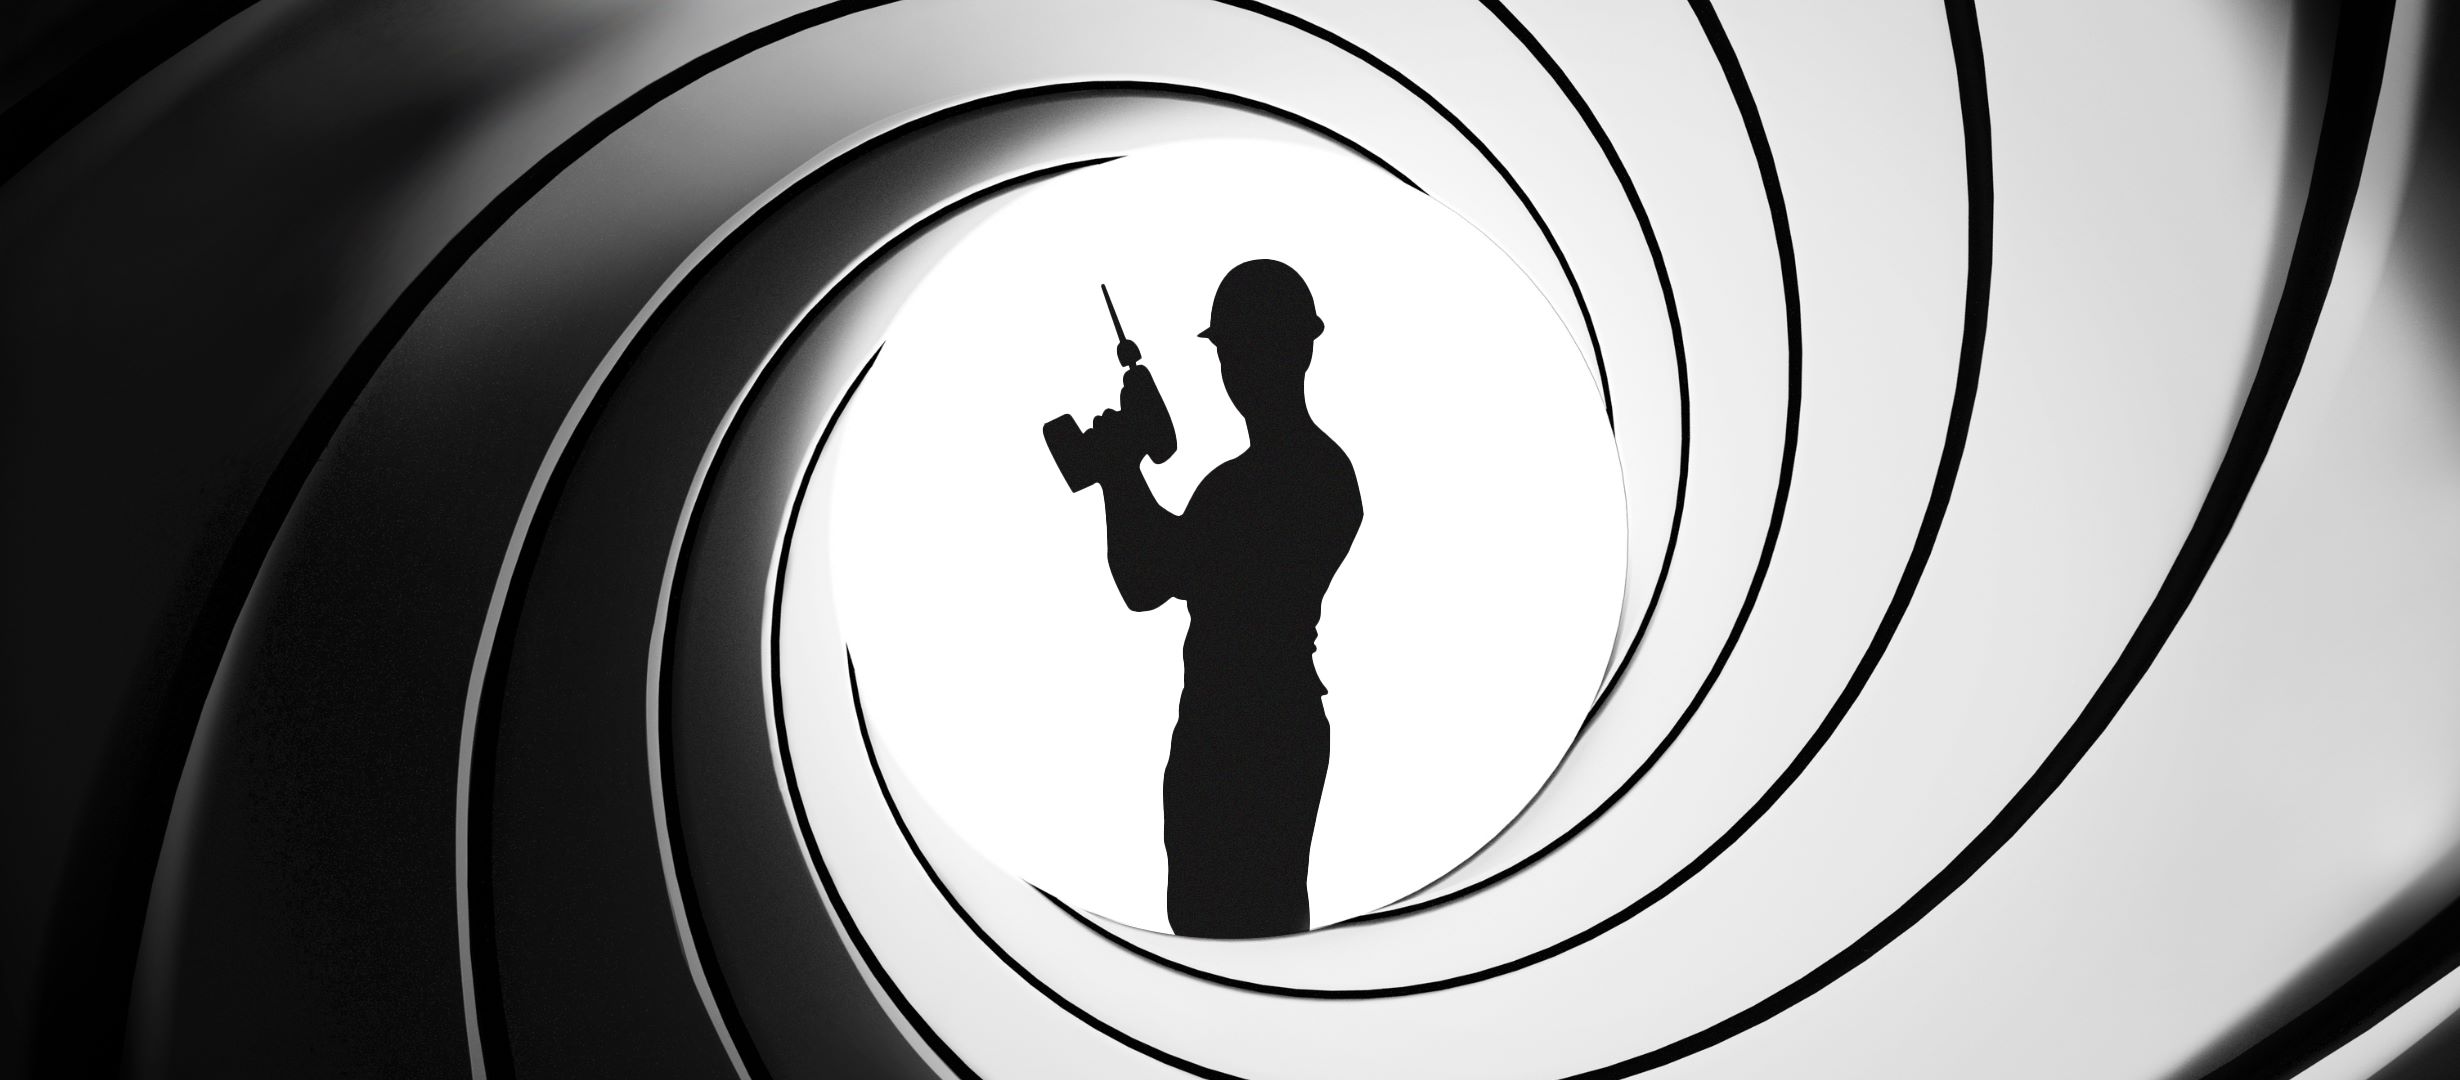 James Bond themed image with a silhouette of a construction worker posing with a drill